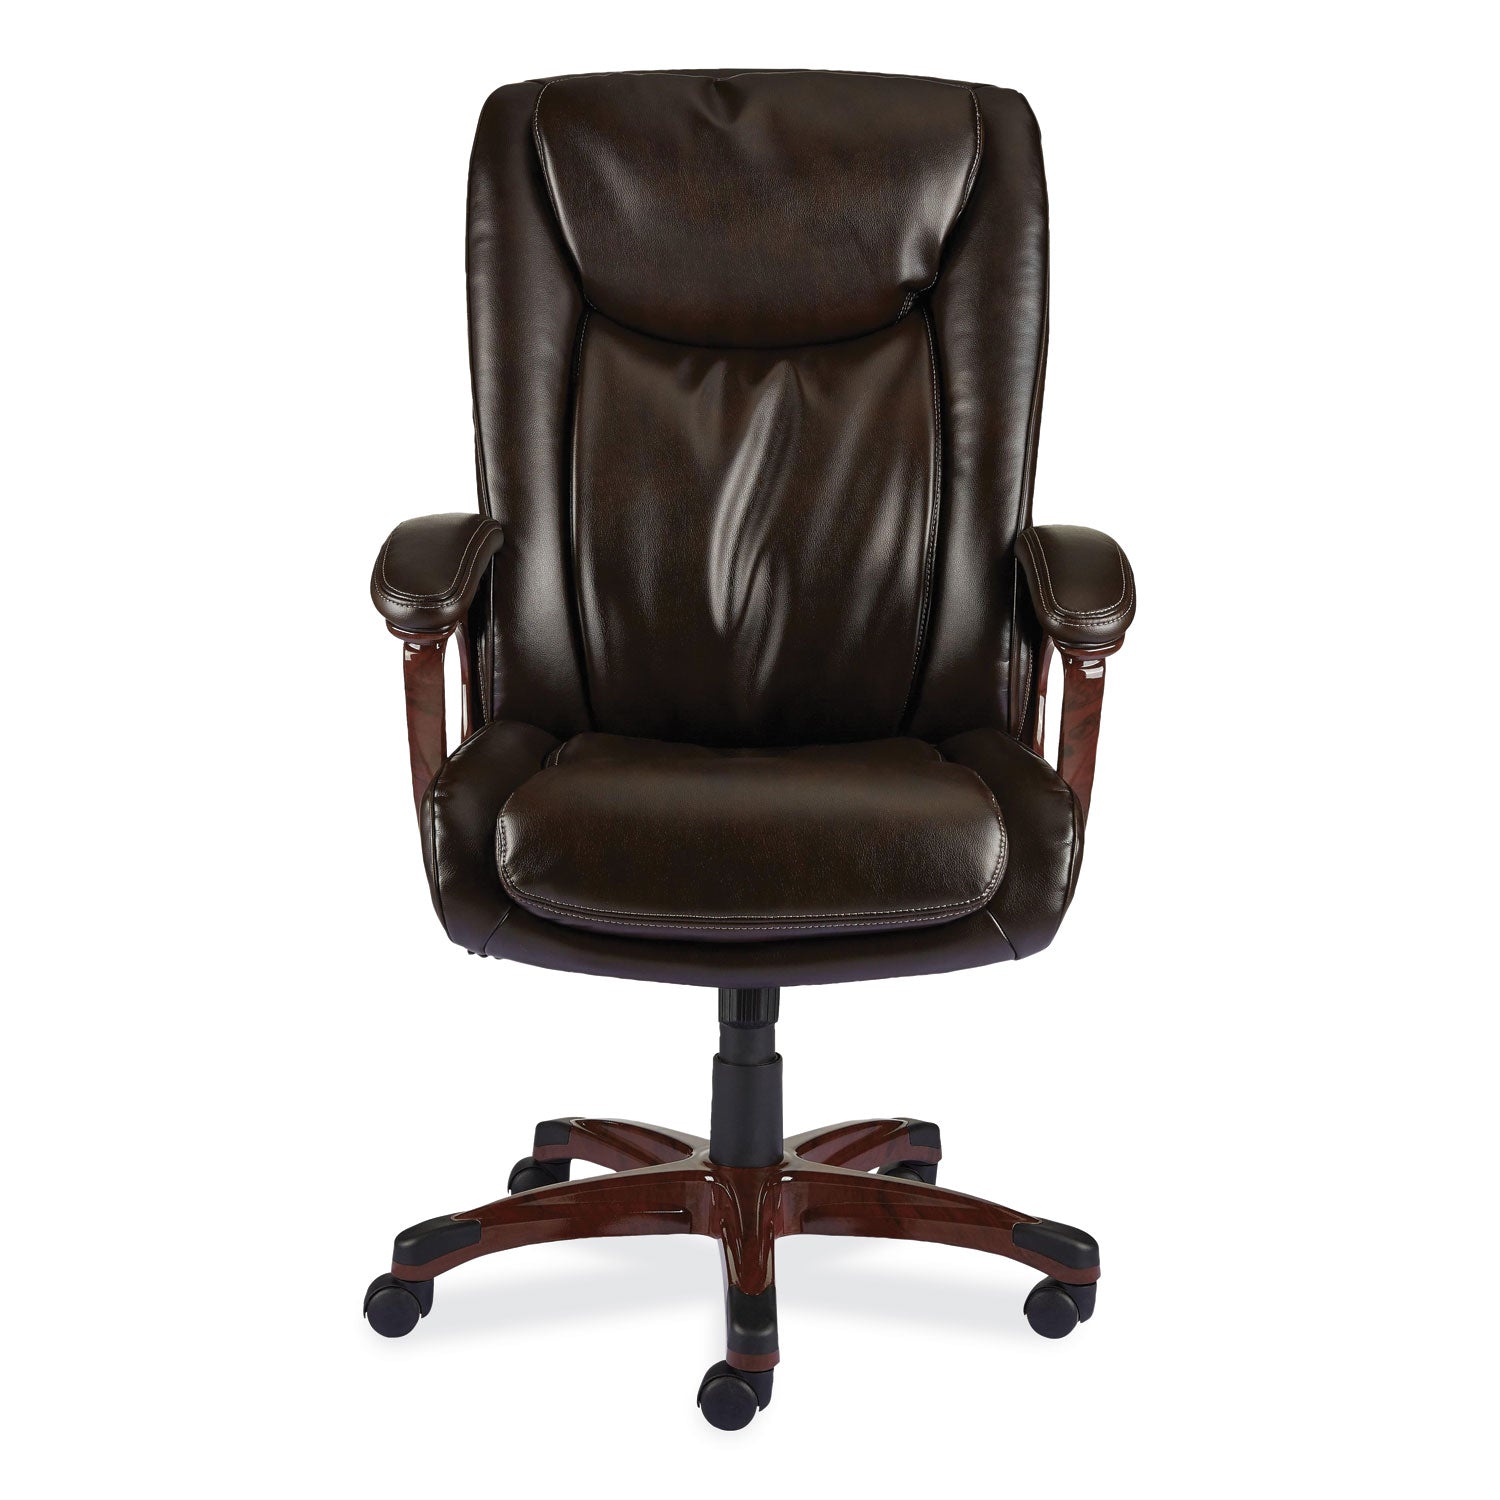 Alera Darnick Series Manager Chair, Supports Up to 275 lbs, 17.13" to 20.12" Seat Height, Brown Seat/Back, Brown Base - 4